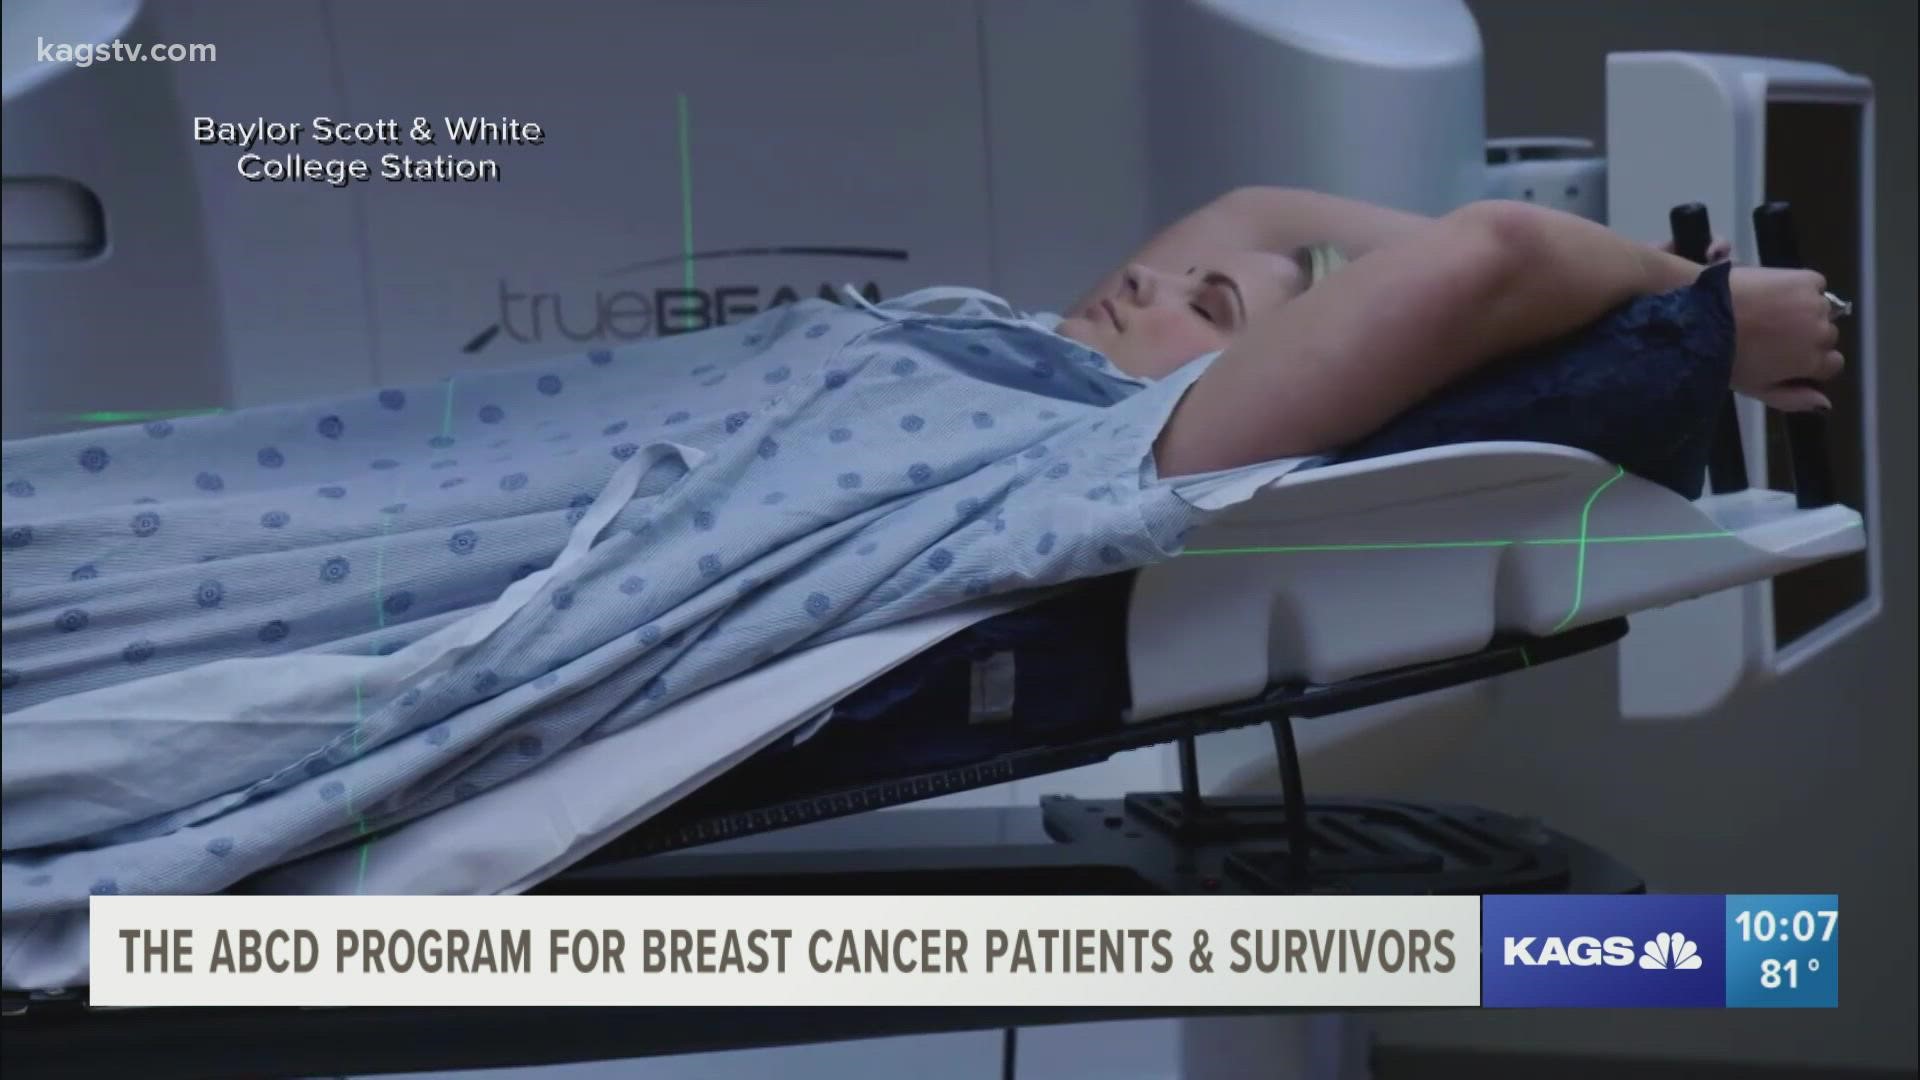 Stephanie Gutierrez, who was diagnosed with breast cancer two years ago, said the program has helped her immensely